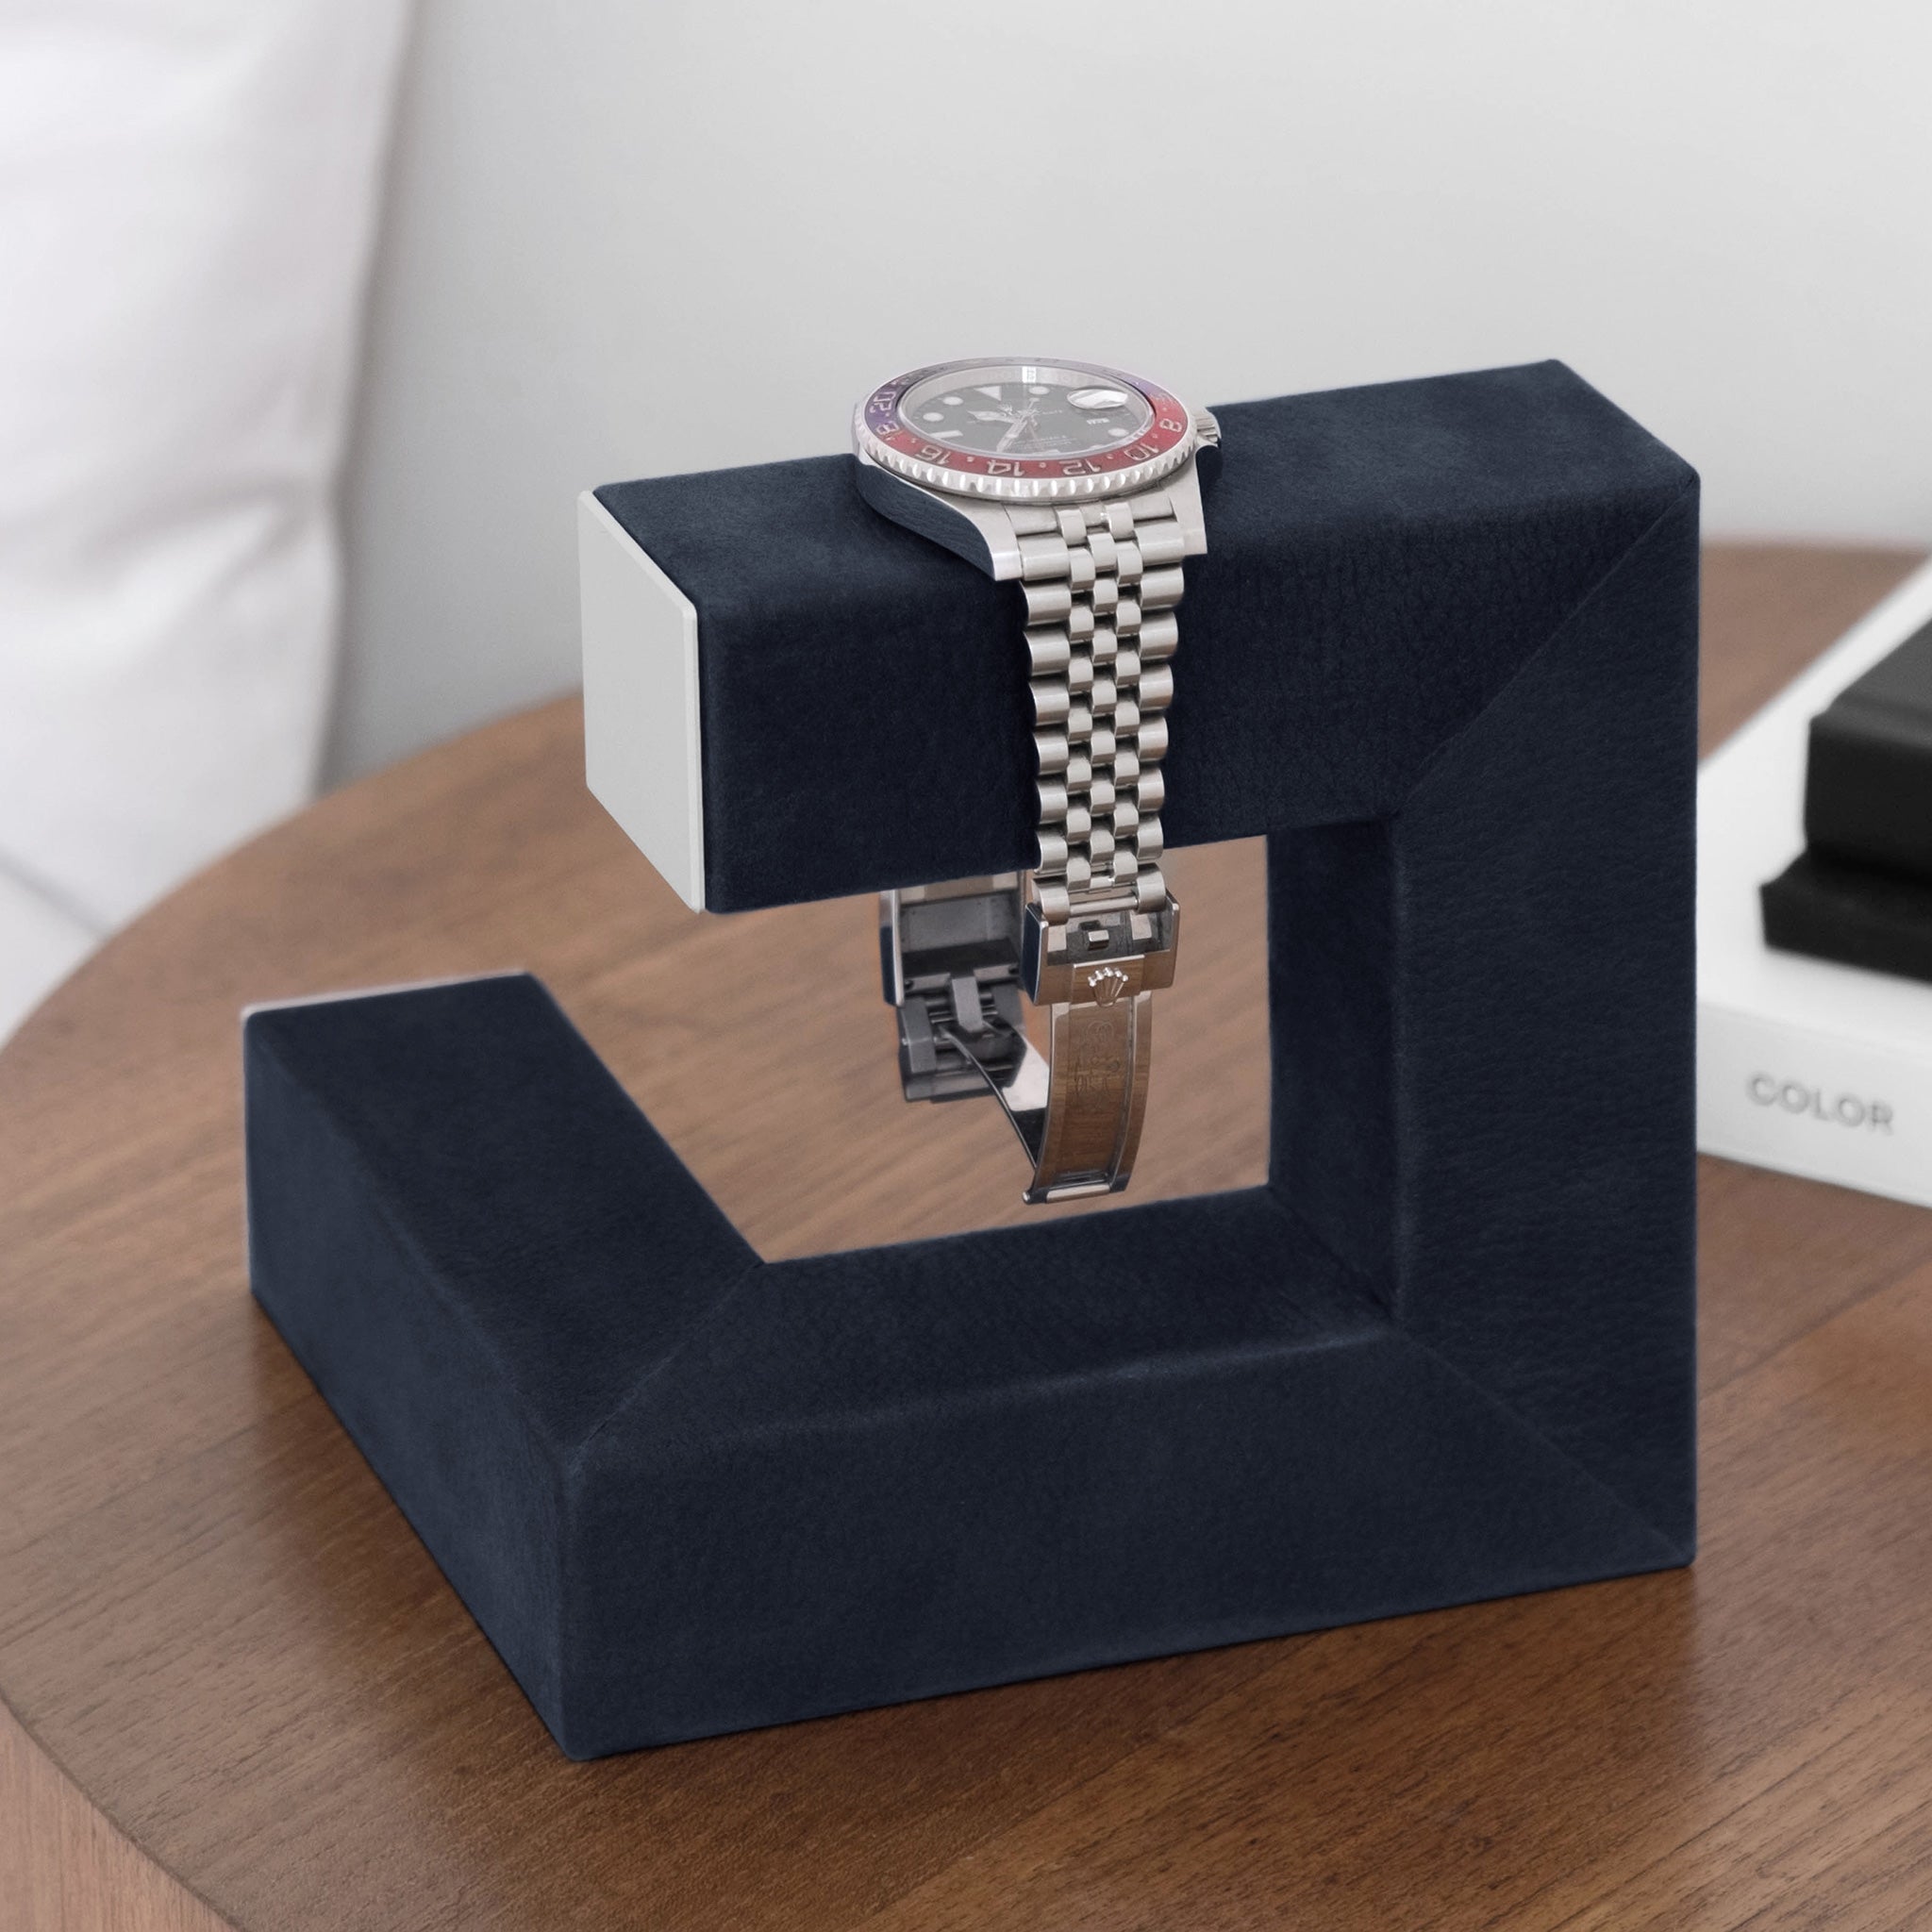 Lifestyle shot of luxury watch stand holding 1 Rolex GMT Pepsi watch in modern bedroom setting